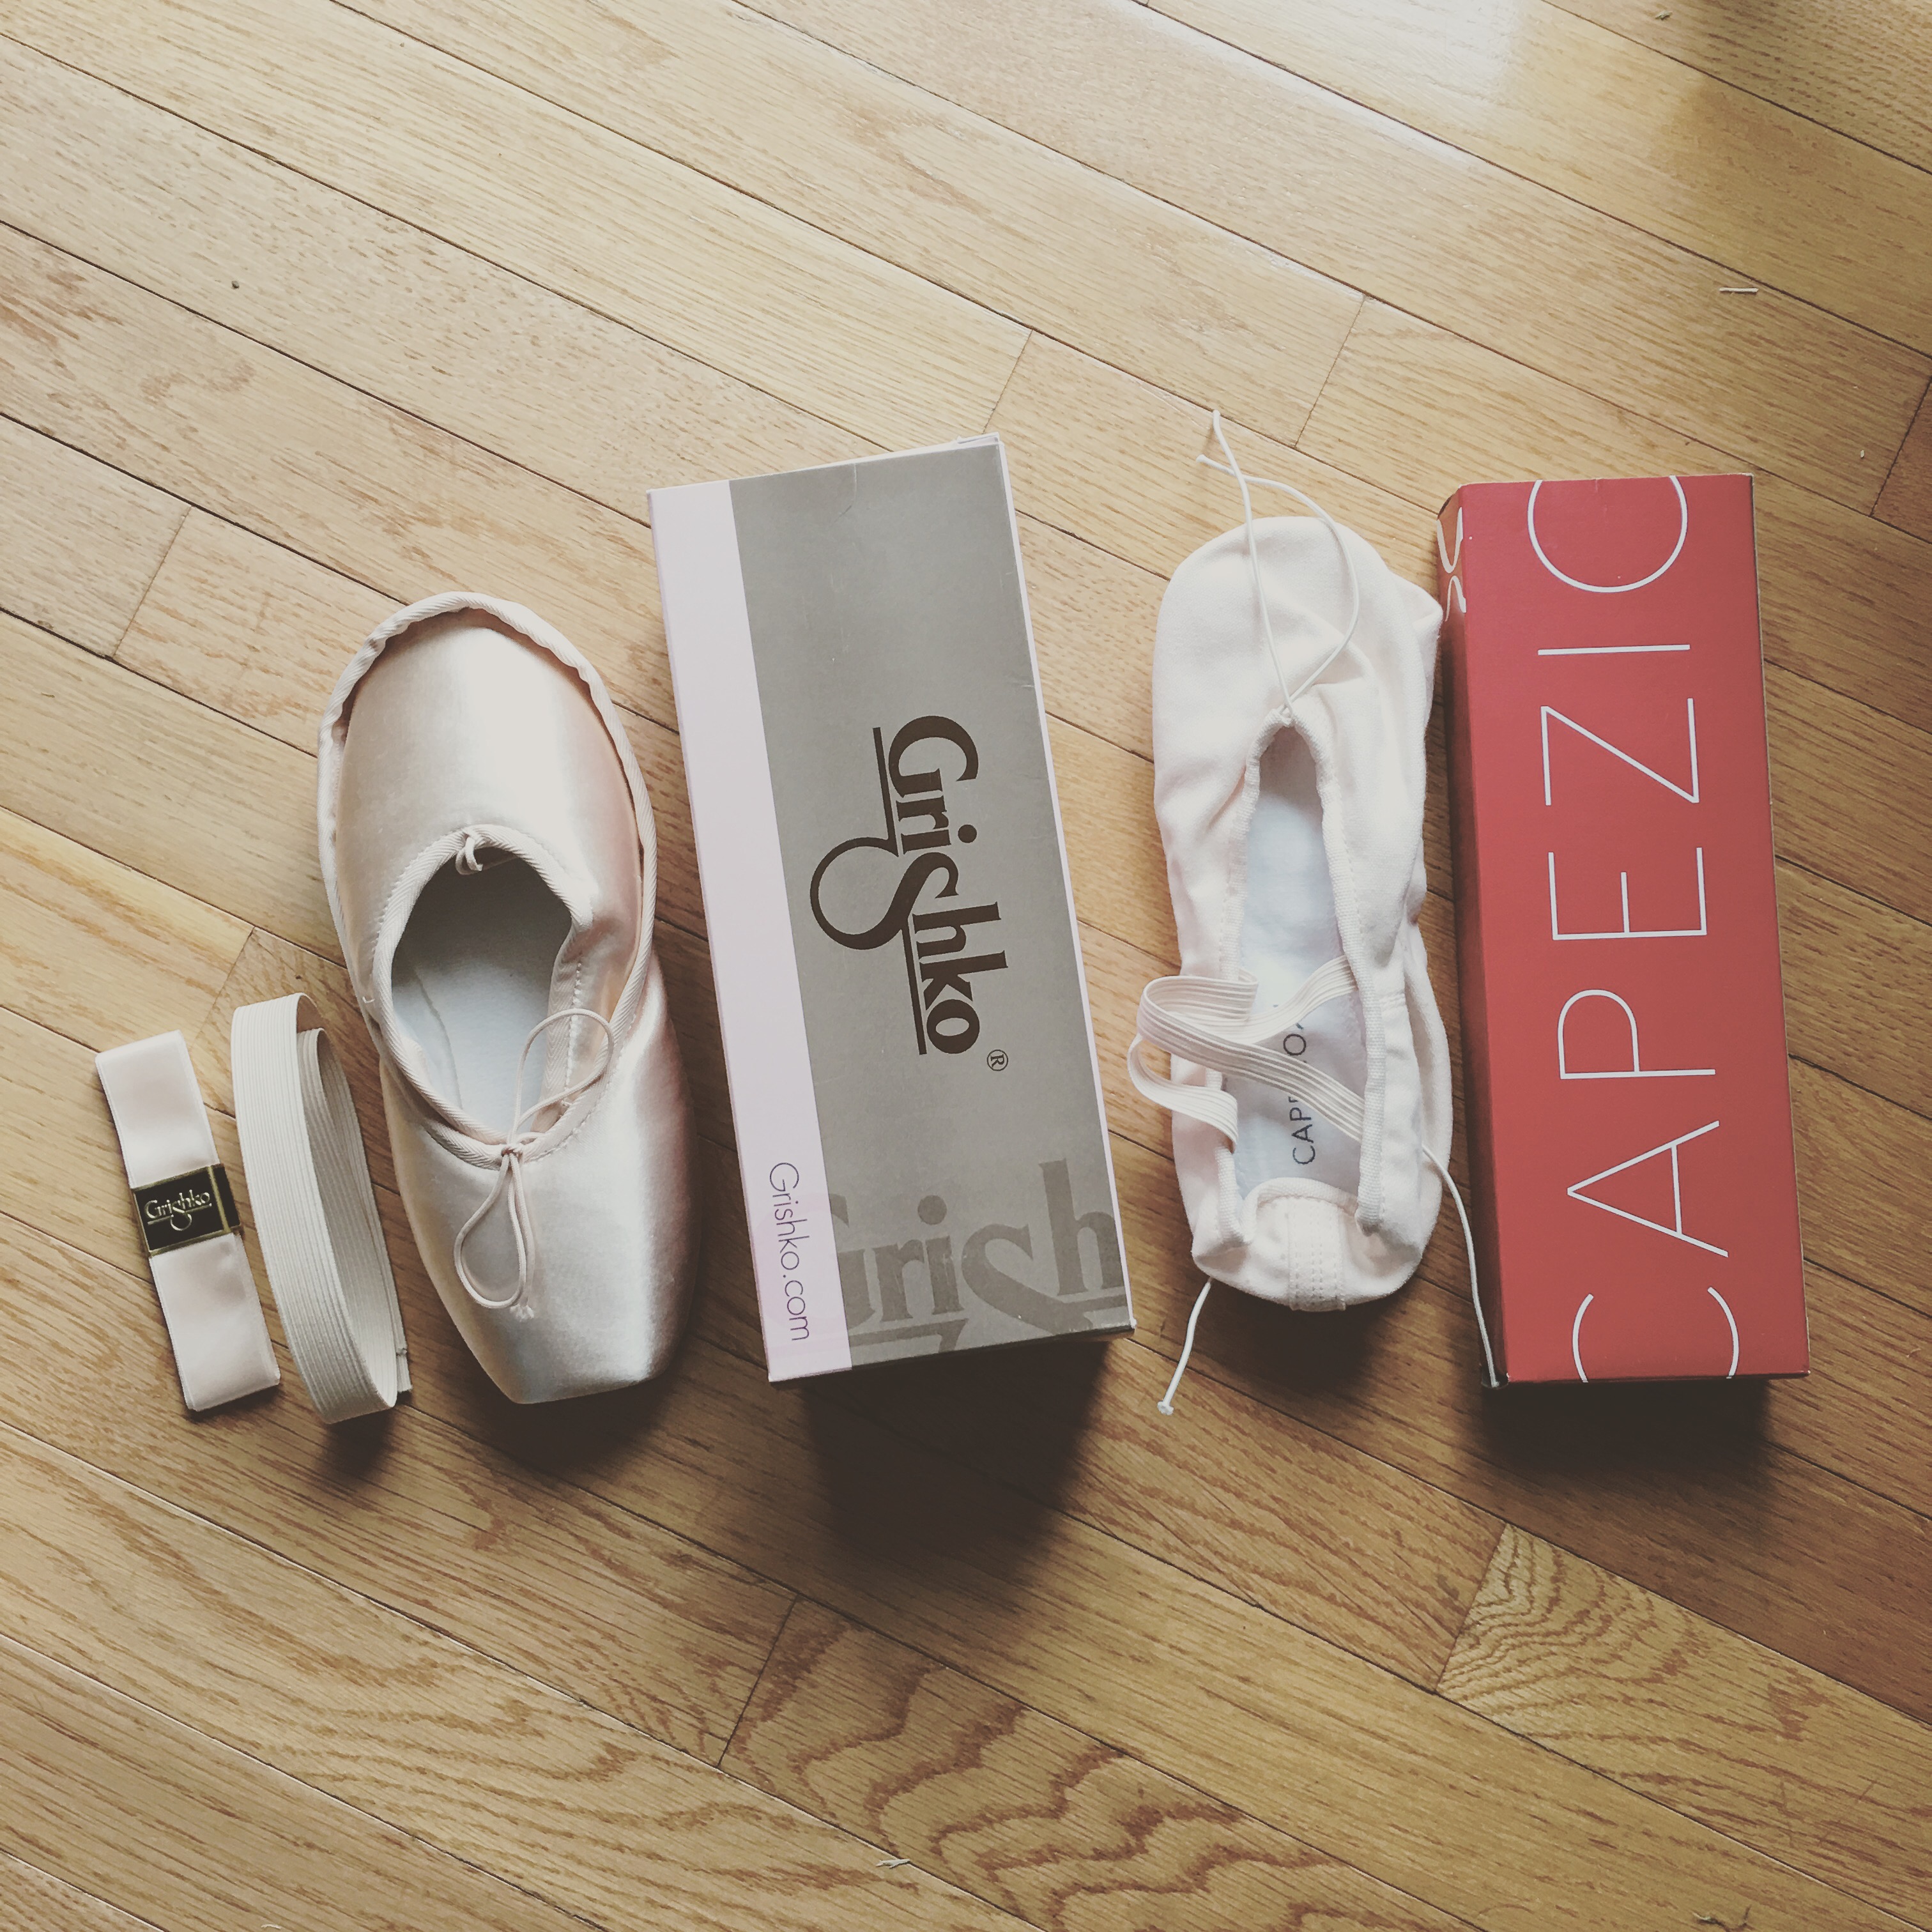 grishko miracle – Right Here at the Barre